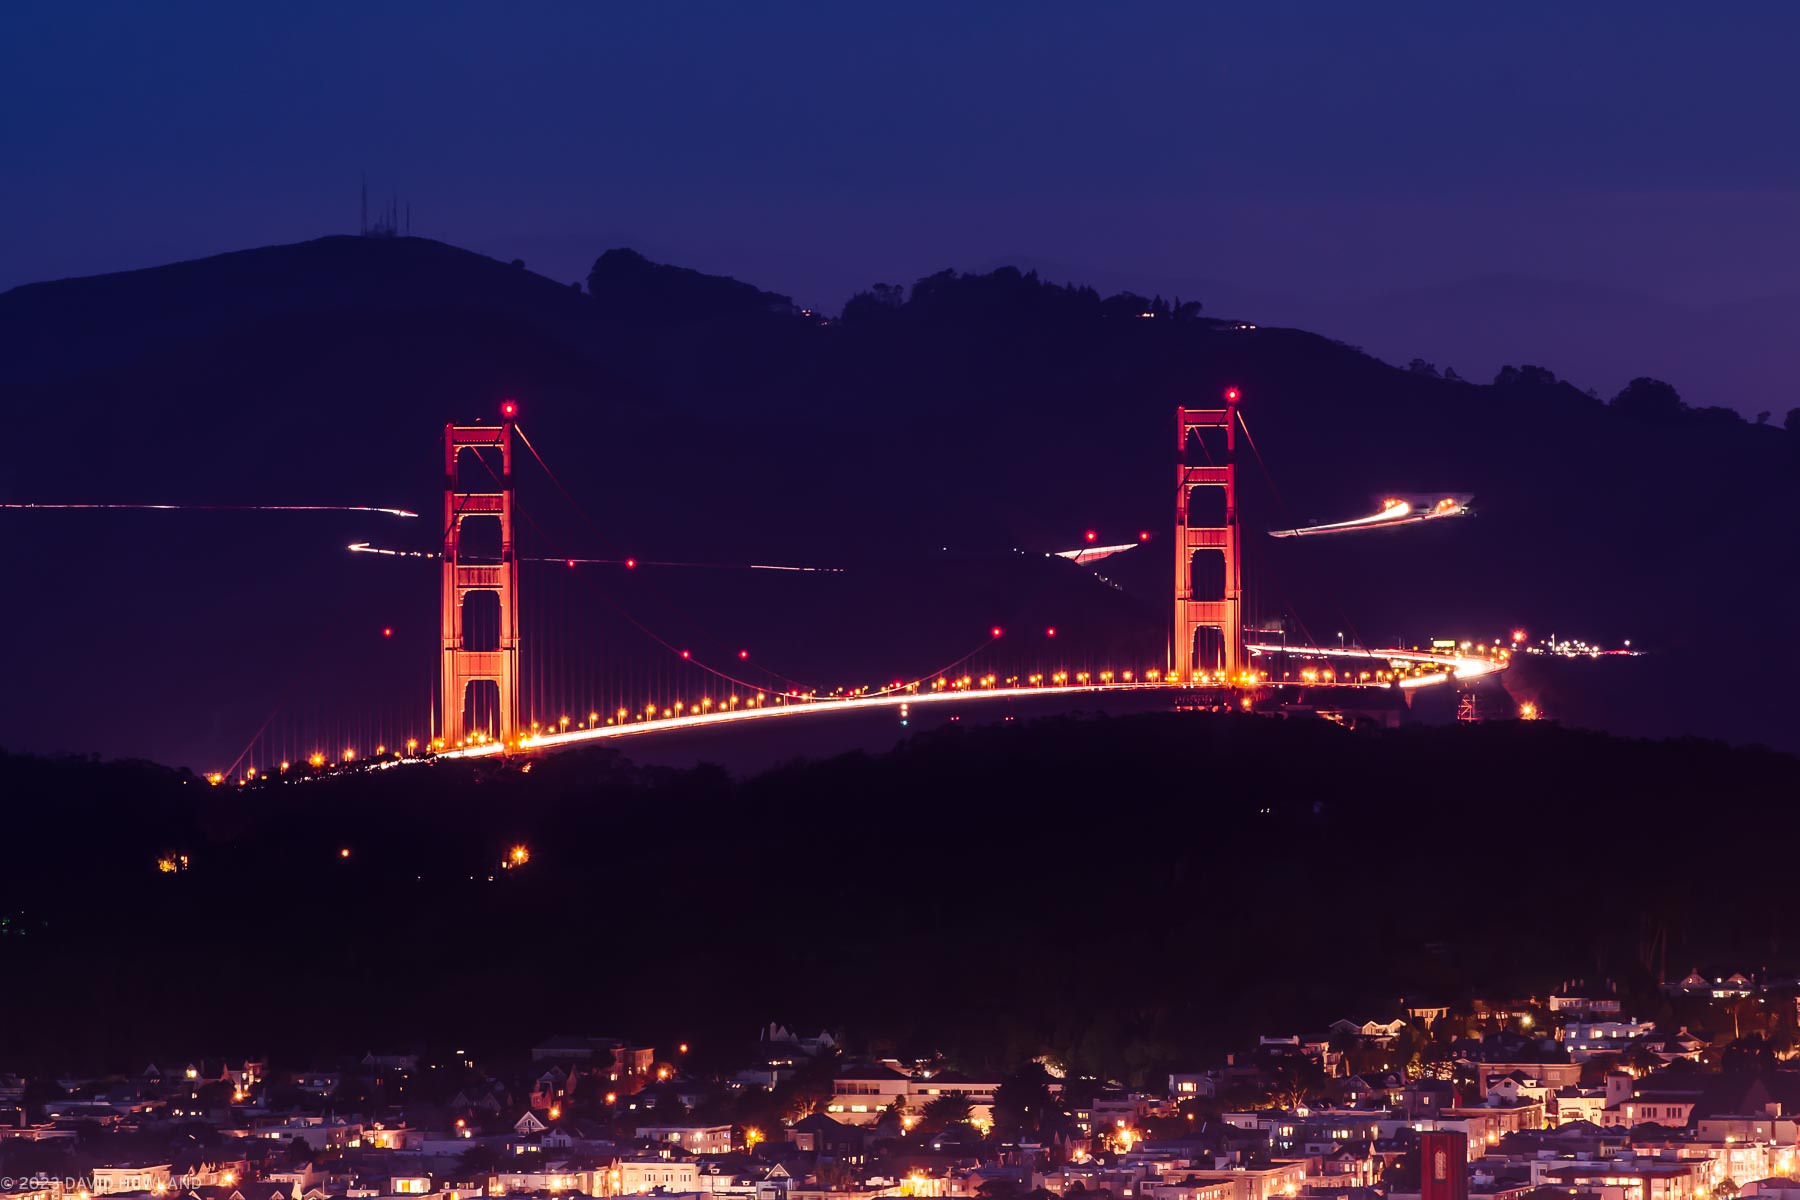 A long exposure photo of the Golden Gate Bridge taken from Twin Peaks with the streams of traffic in the Marin Headlands visible behind the bridge.